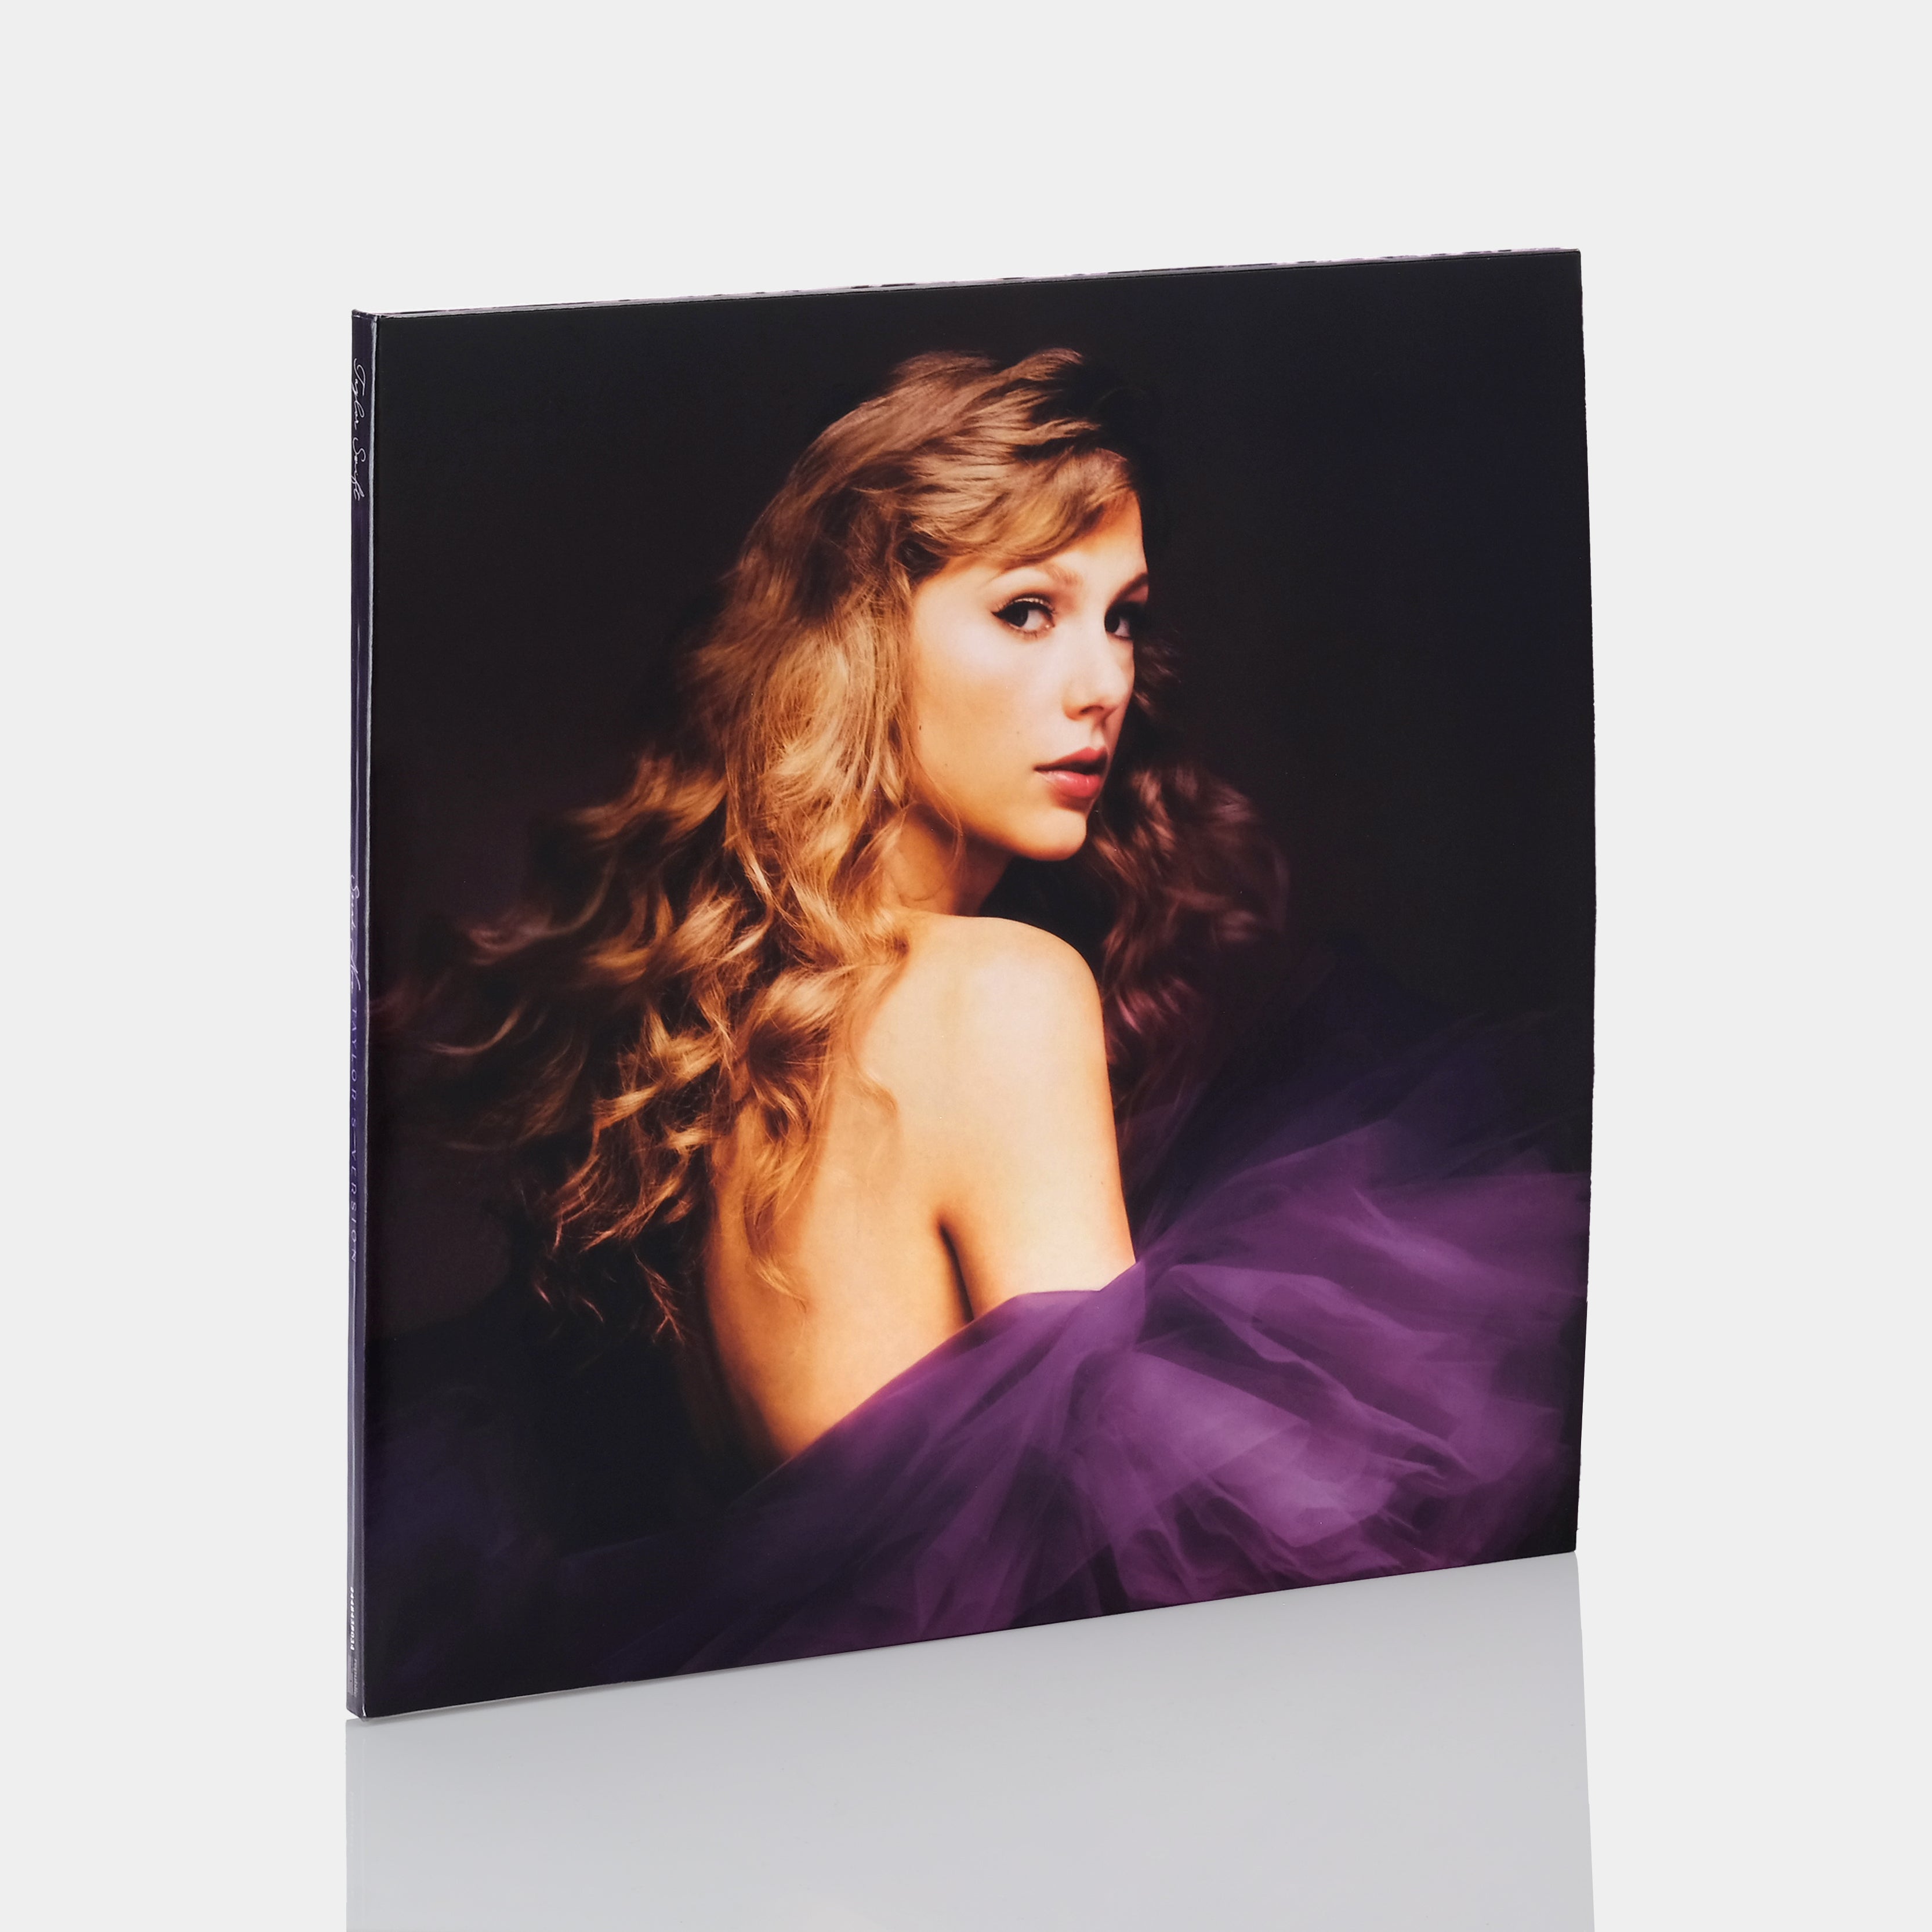 Taylor Swift - Speak Now (Taylor's Version) 3xLP Orchid Marbled Vinyl Record